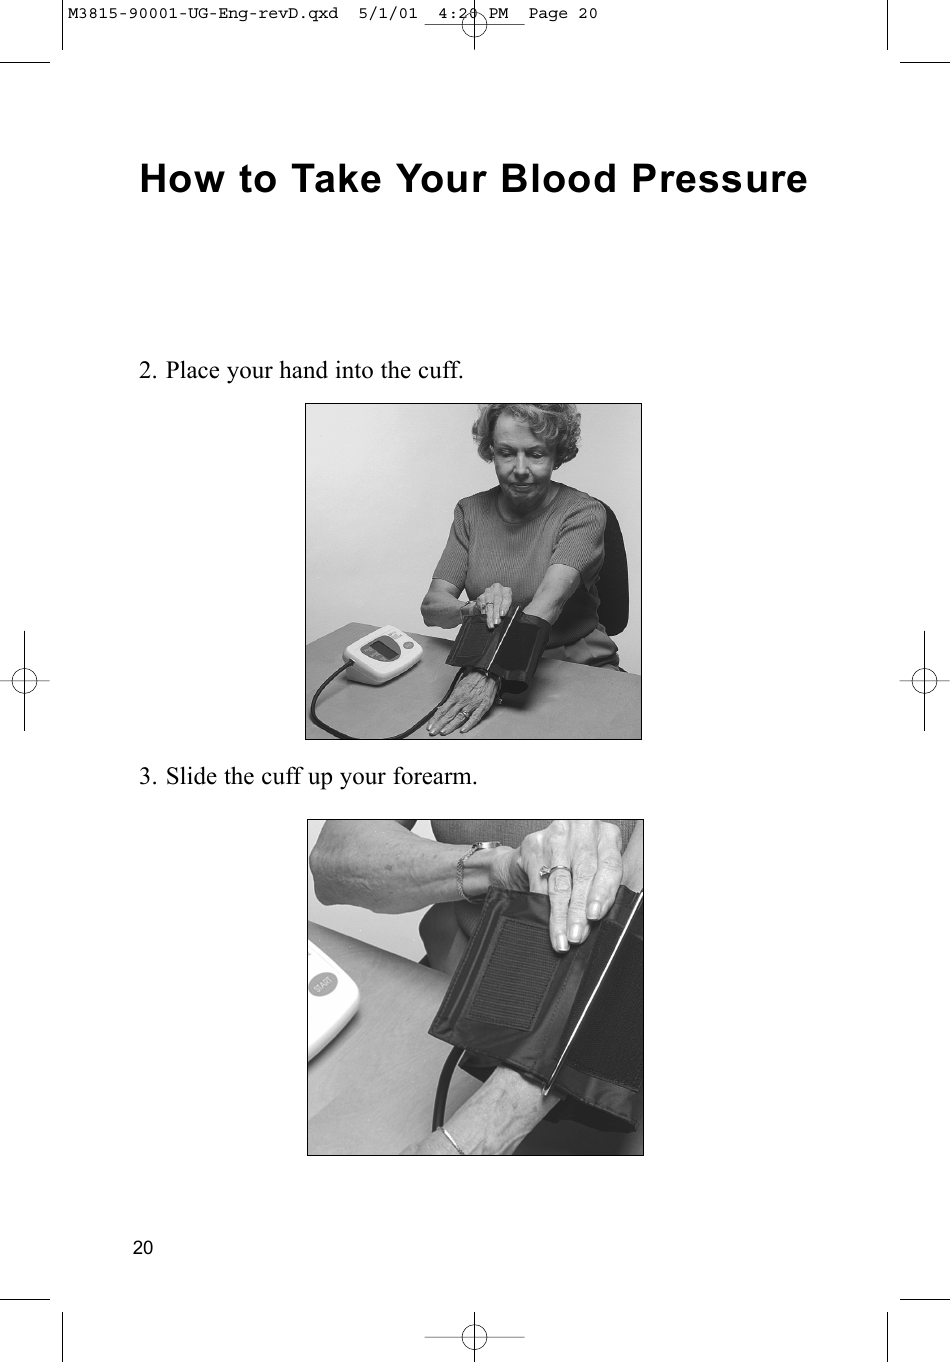 20How to Take Your Blood Pressure2. Place your hand into the cuff.3. Slide the cuff up your forearm.M3815-90001-UG-Eng-revD.qxd  5/1/01  4:20 PM  Page 20